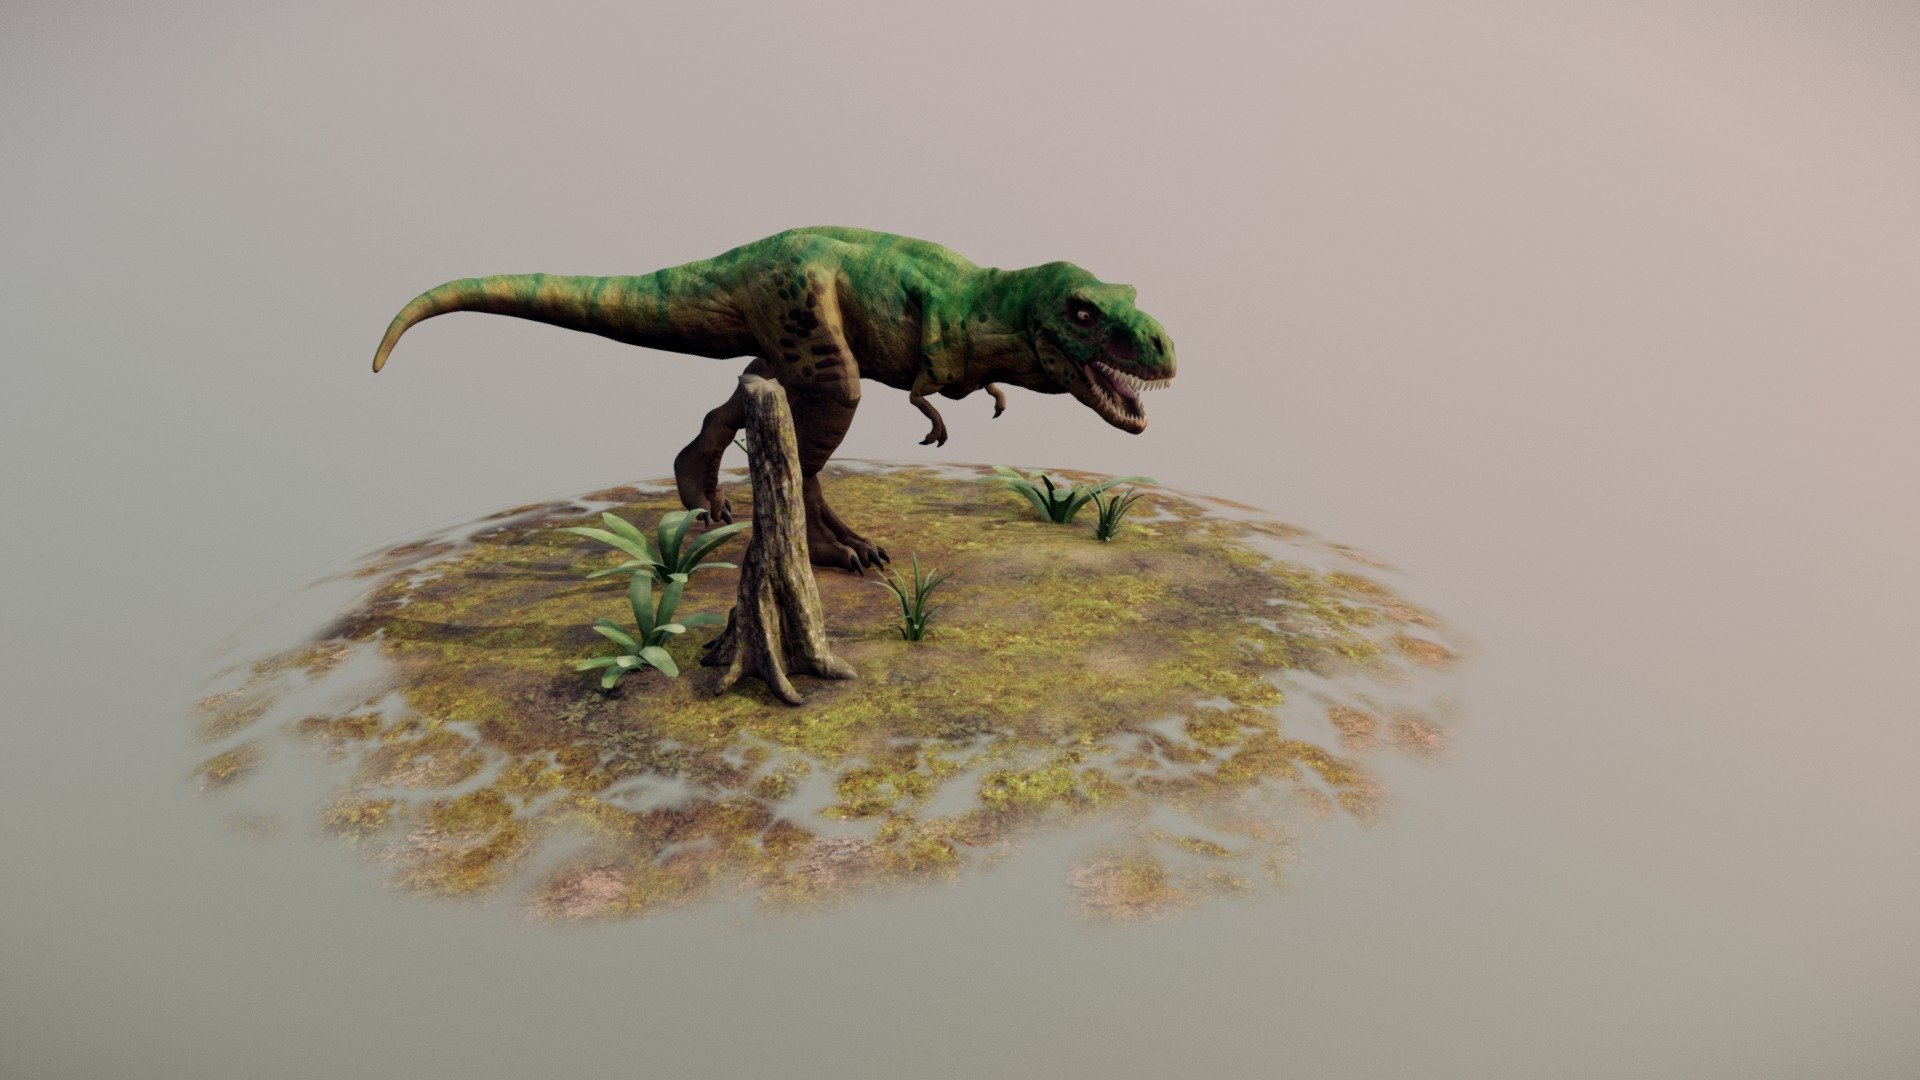 One day project. Yet another dinosaur 3d model